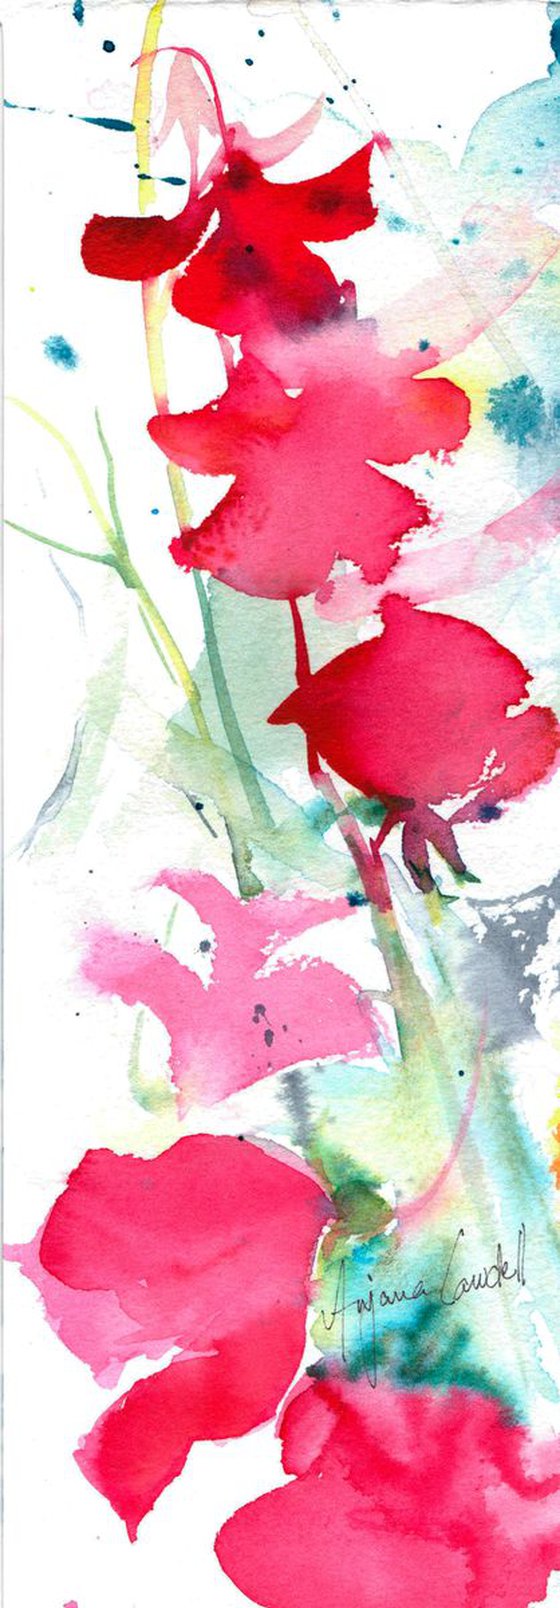 Sweetpea Painting, Floral Art, Original Watercolour painting, Abstract, Small painting, Contemporary Floral